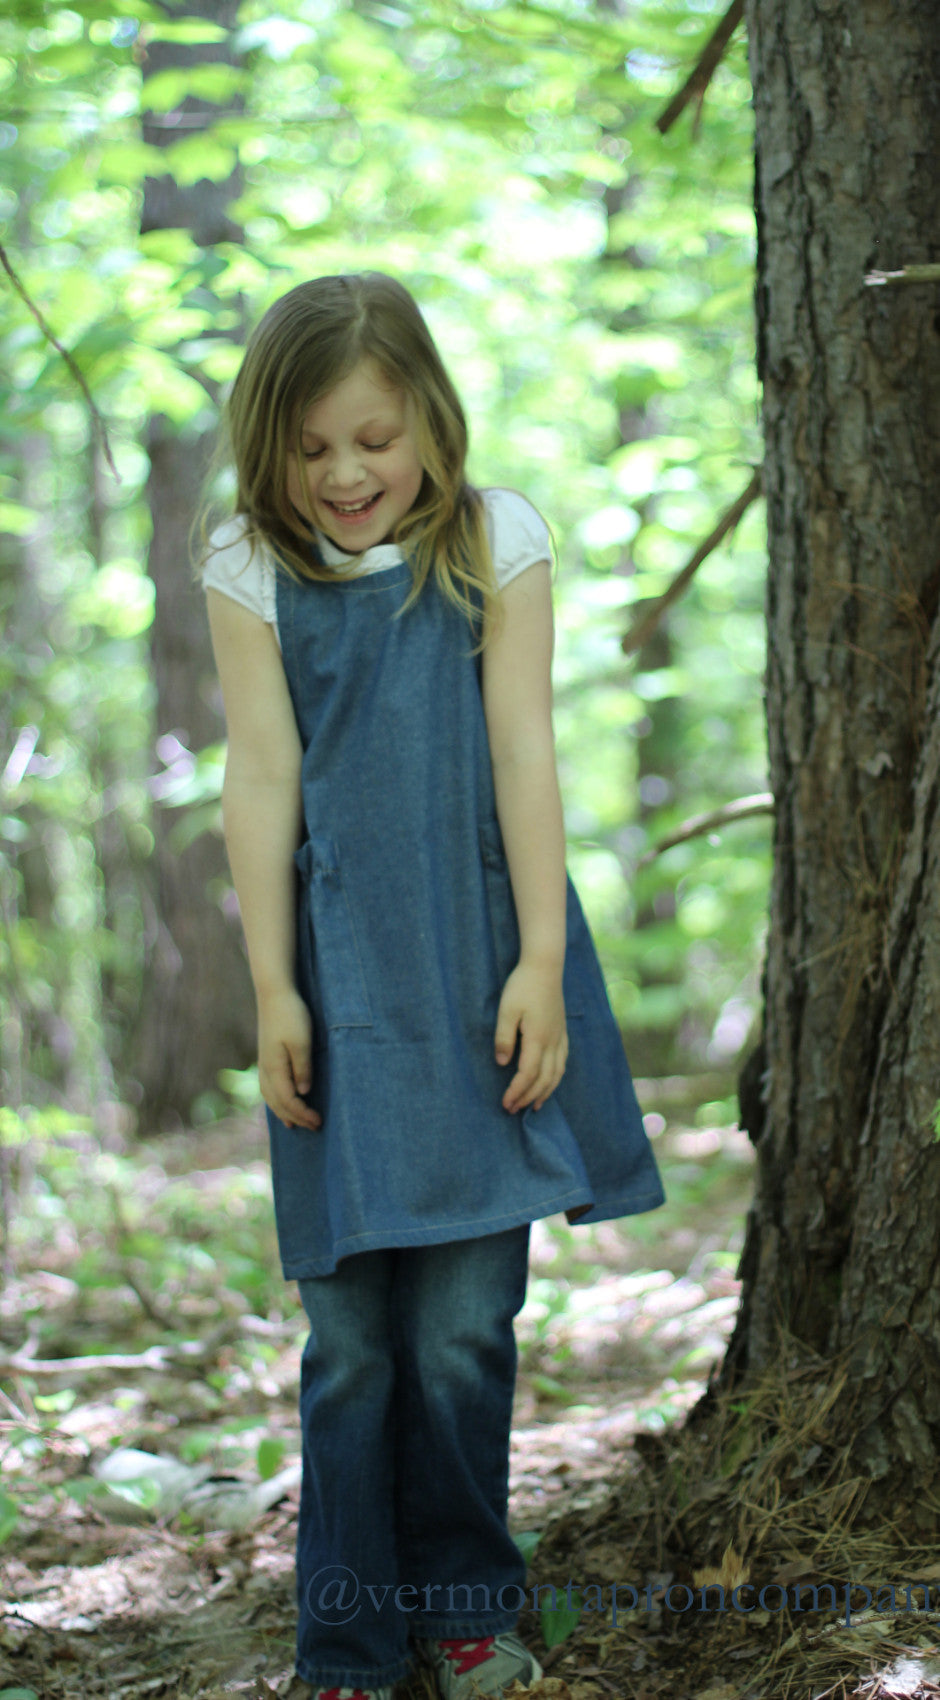 Children's No Tie Apron in Denim with Crisscross Back, front view